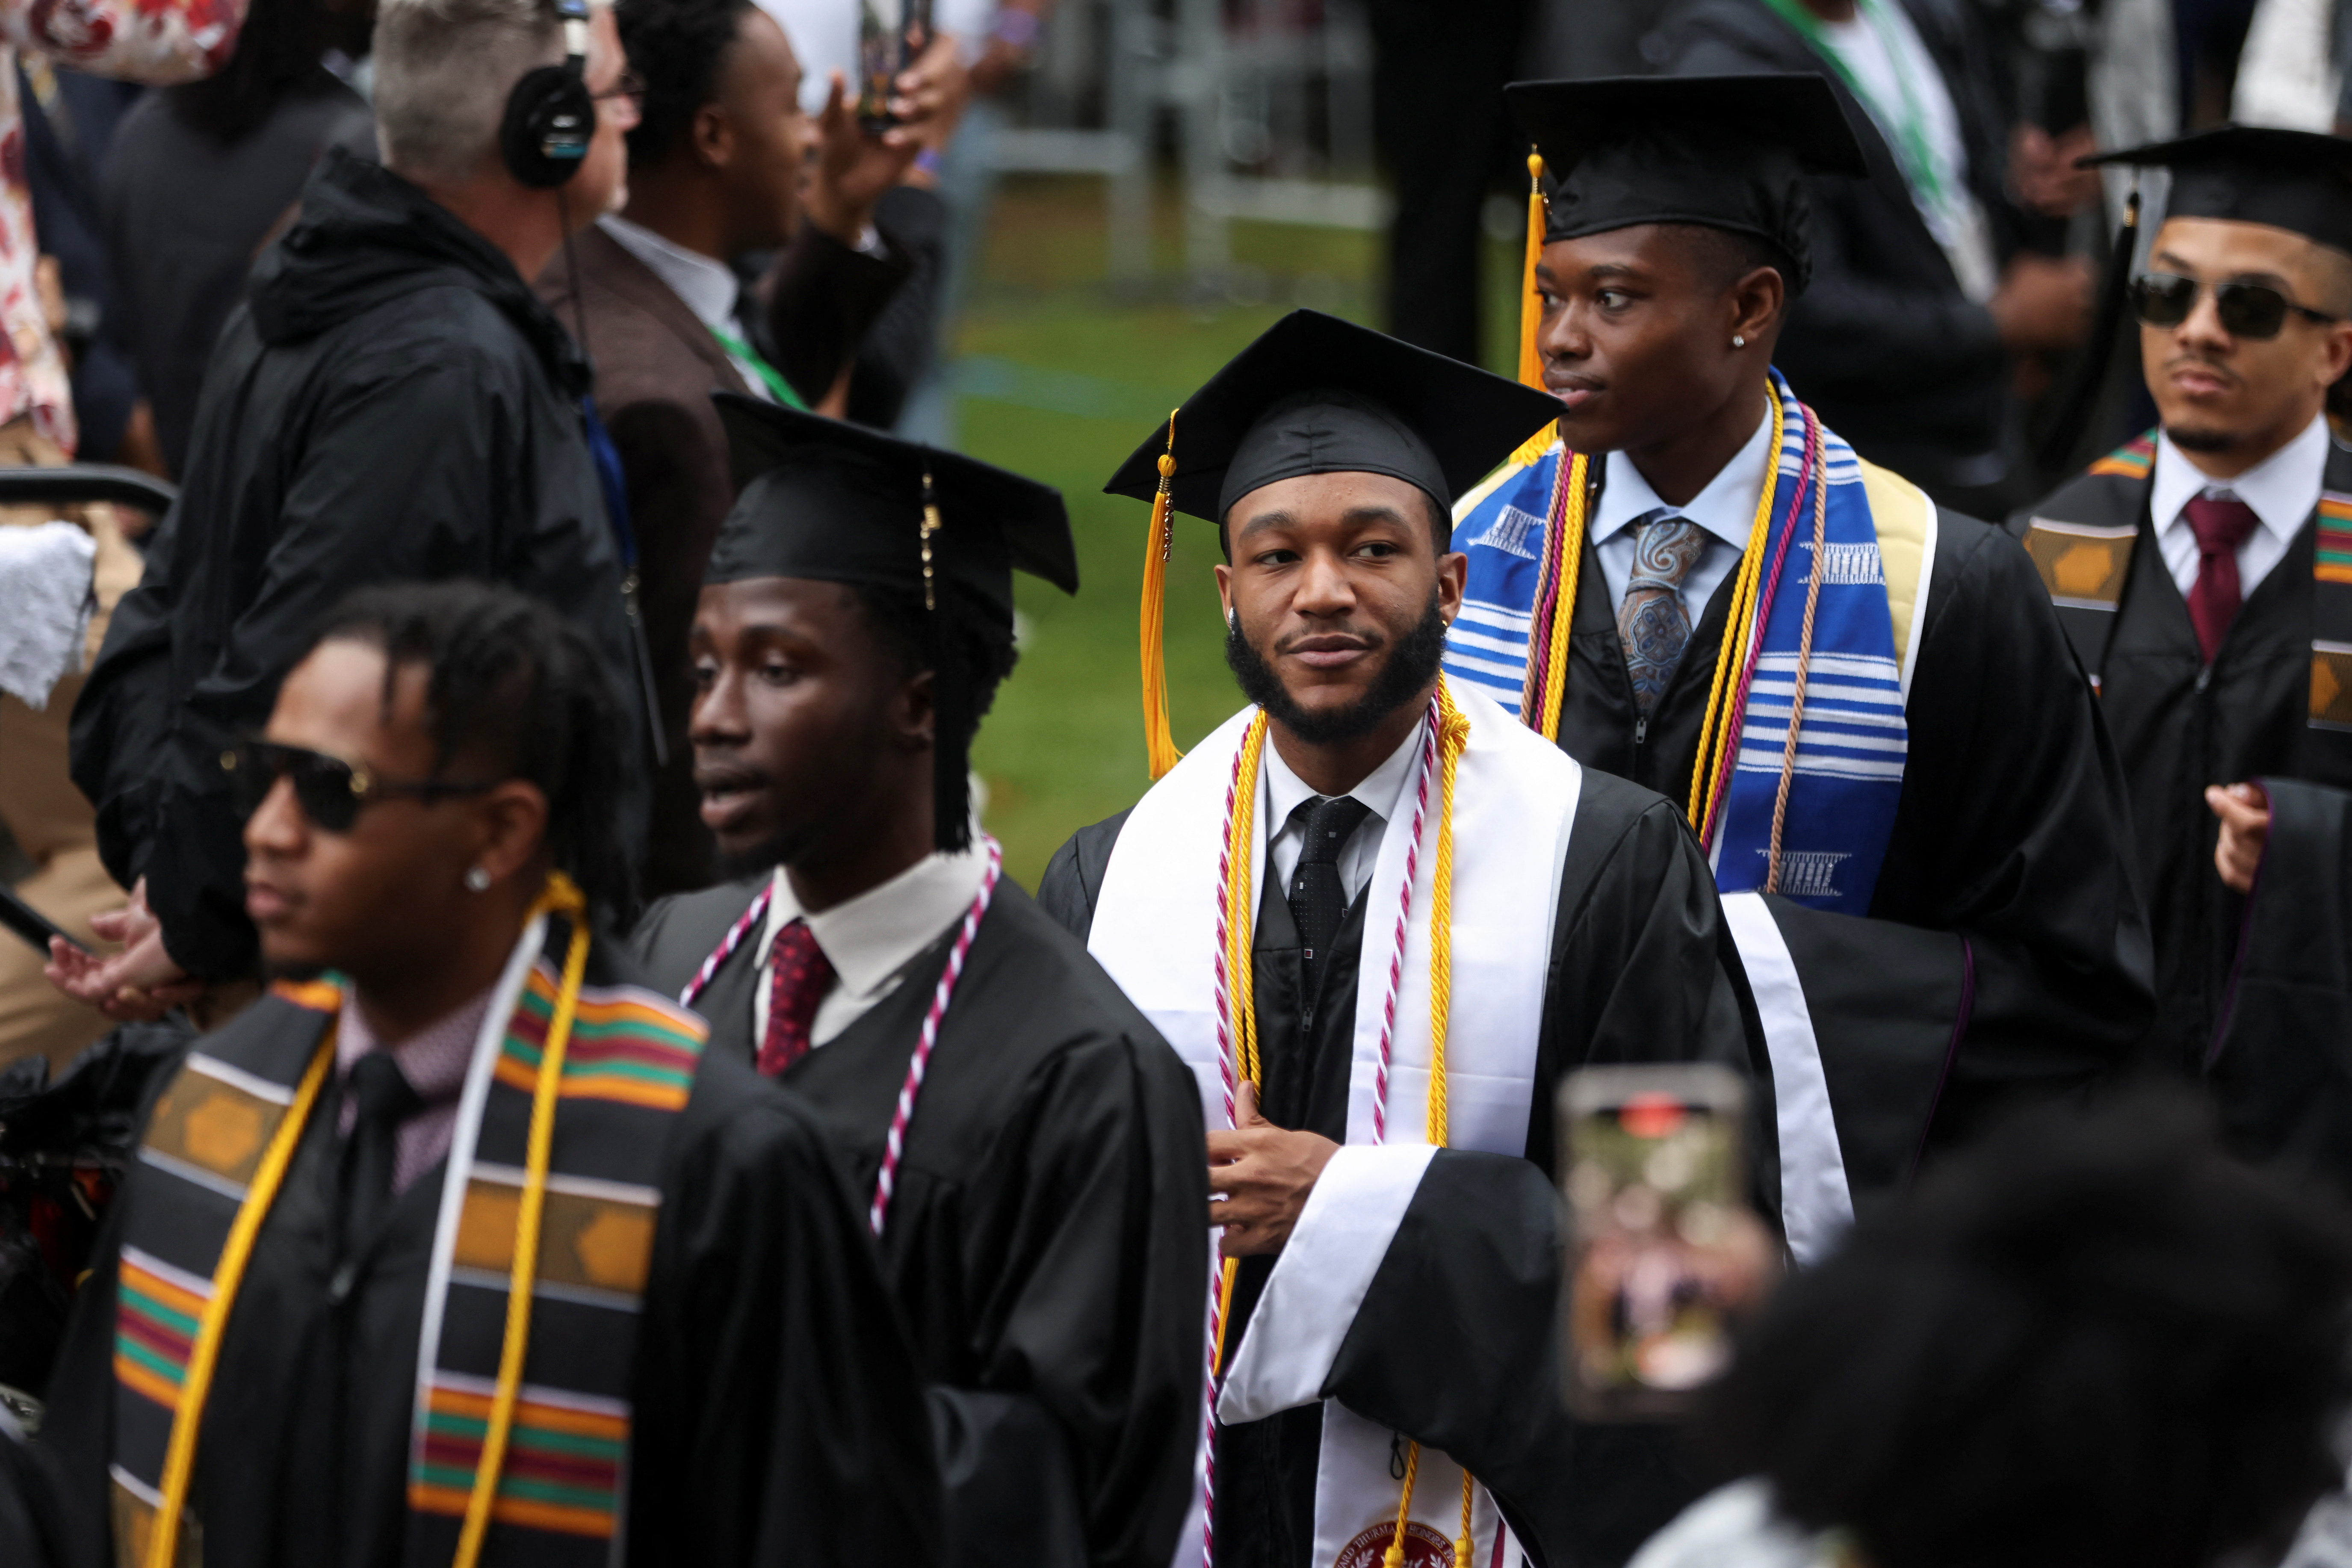 U.S. President Biden speaks to Morehouse College graduates during a commencement ceremony in Atlanta